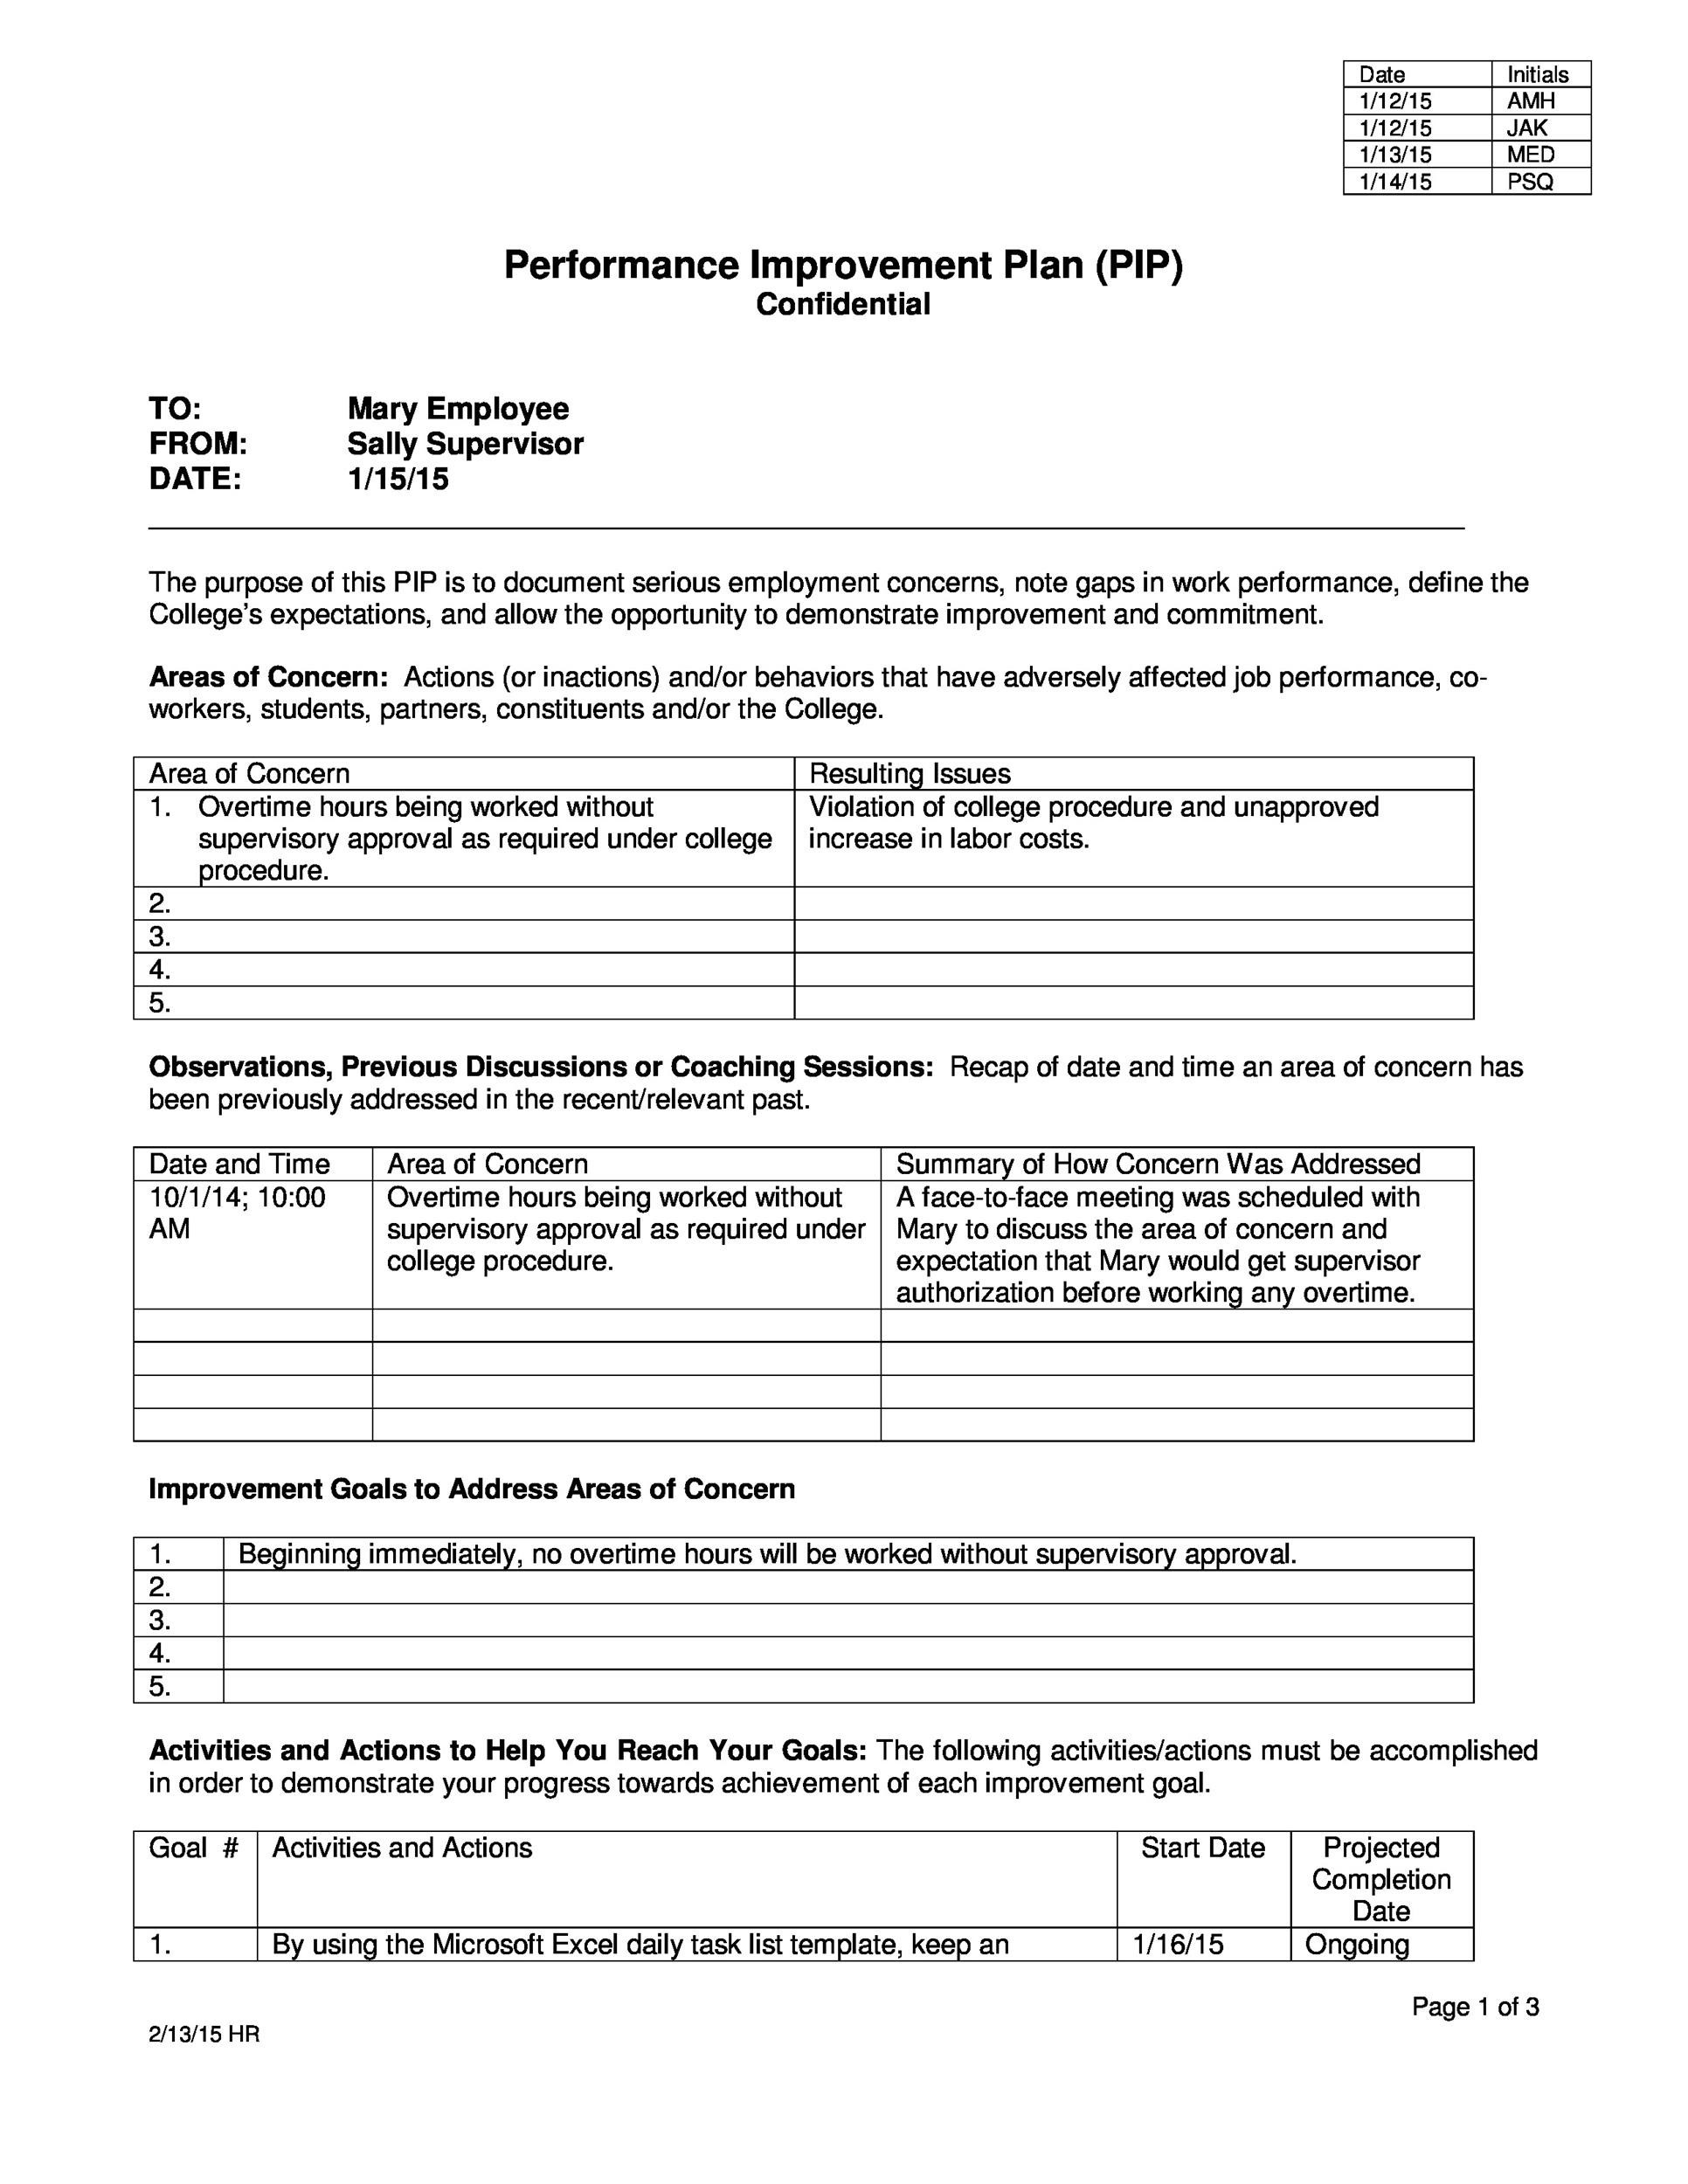 40 Performance Improvement Plan Templates And Examples 5321